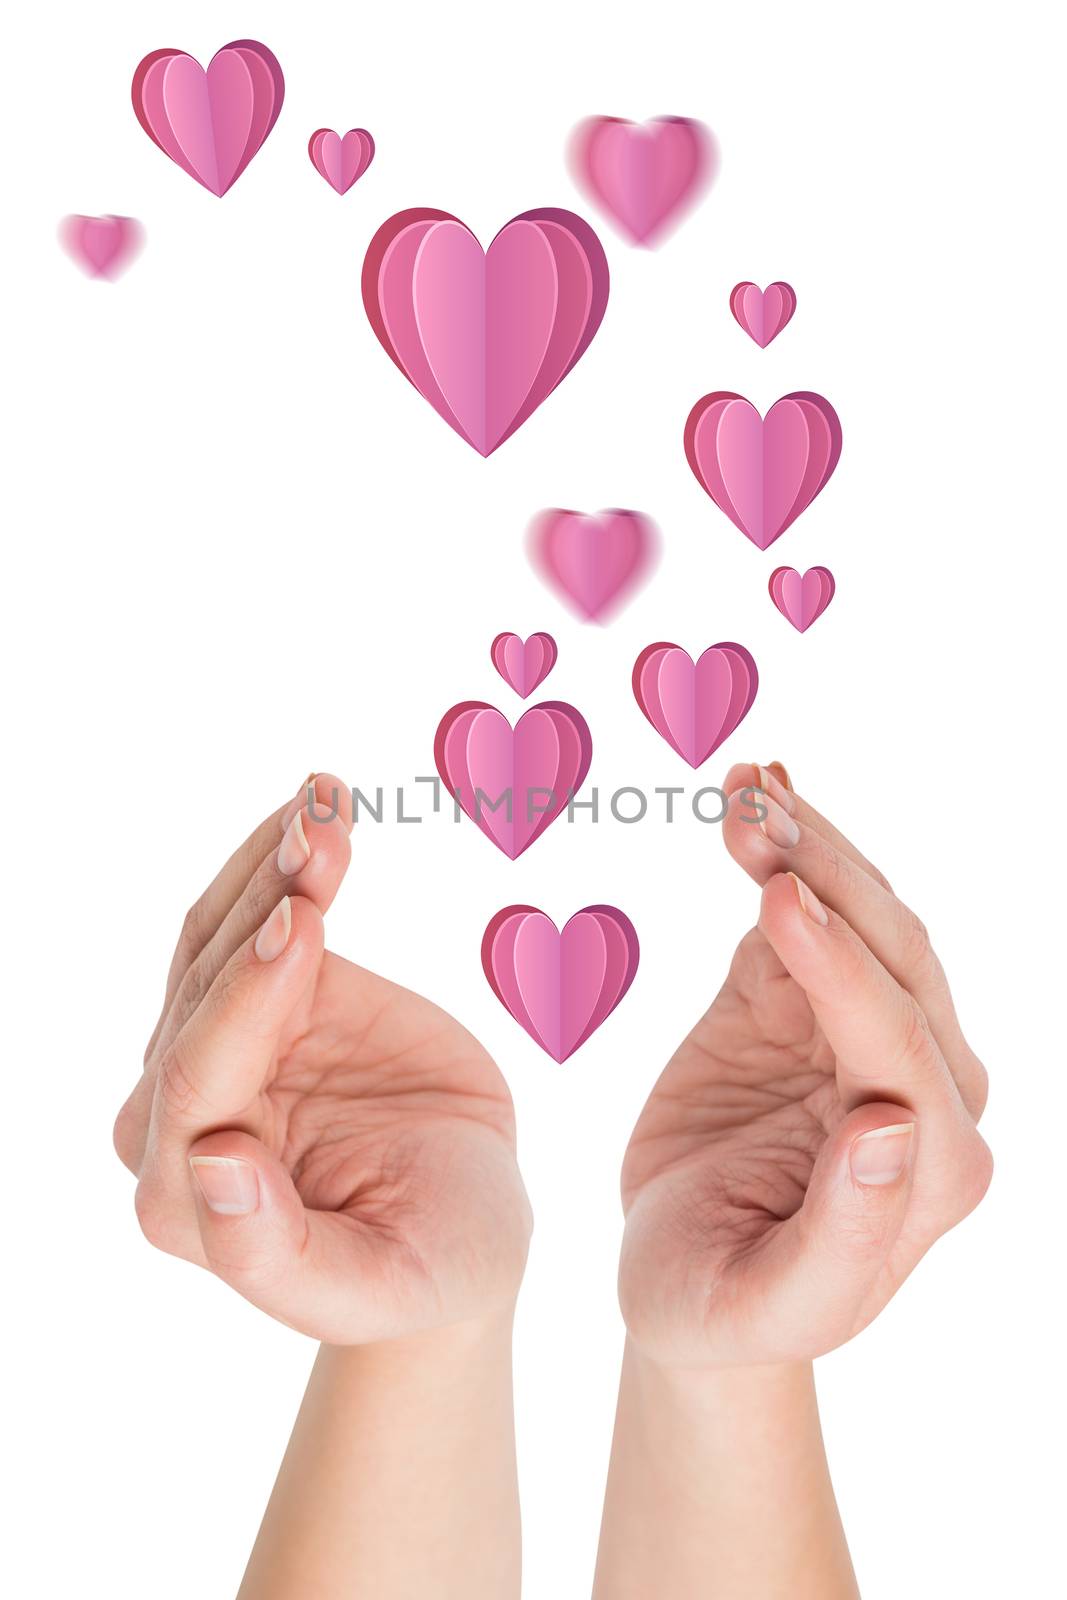 Composite image of hands presenting  by Wavebreakmedia